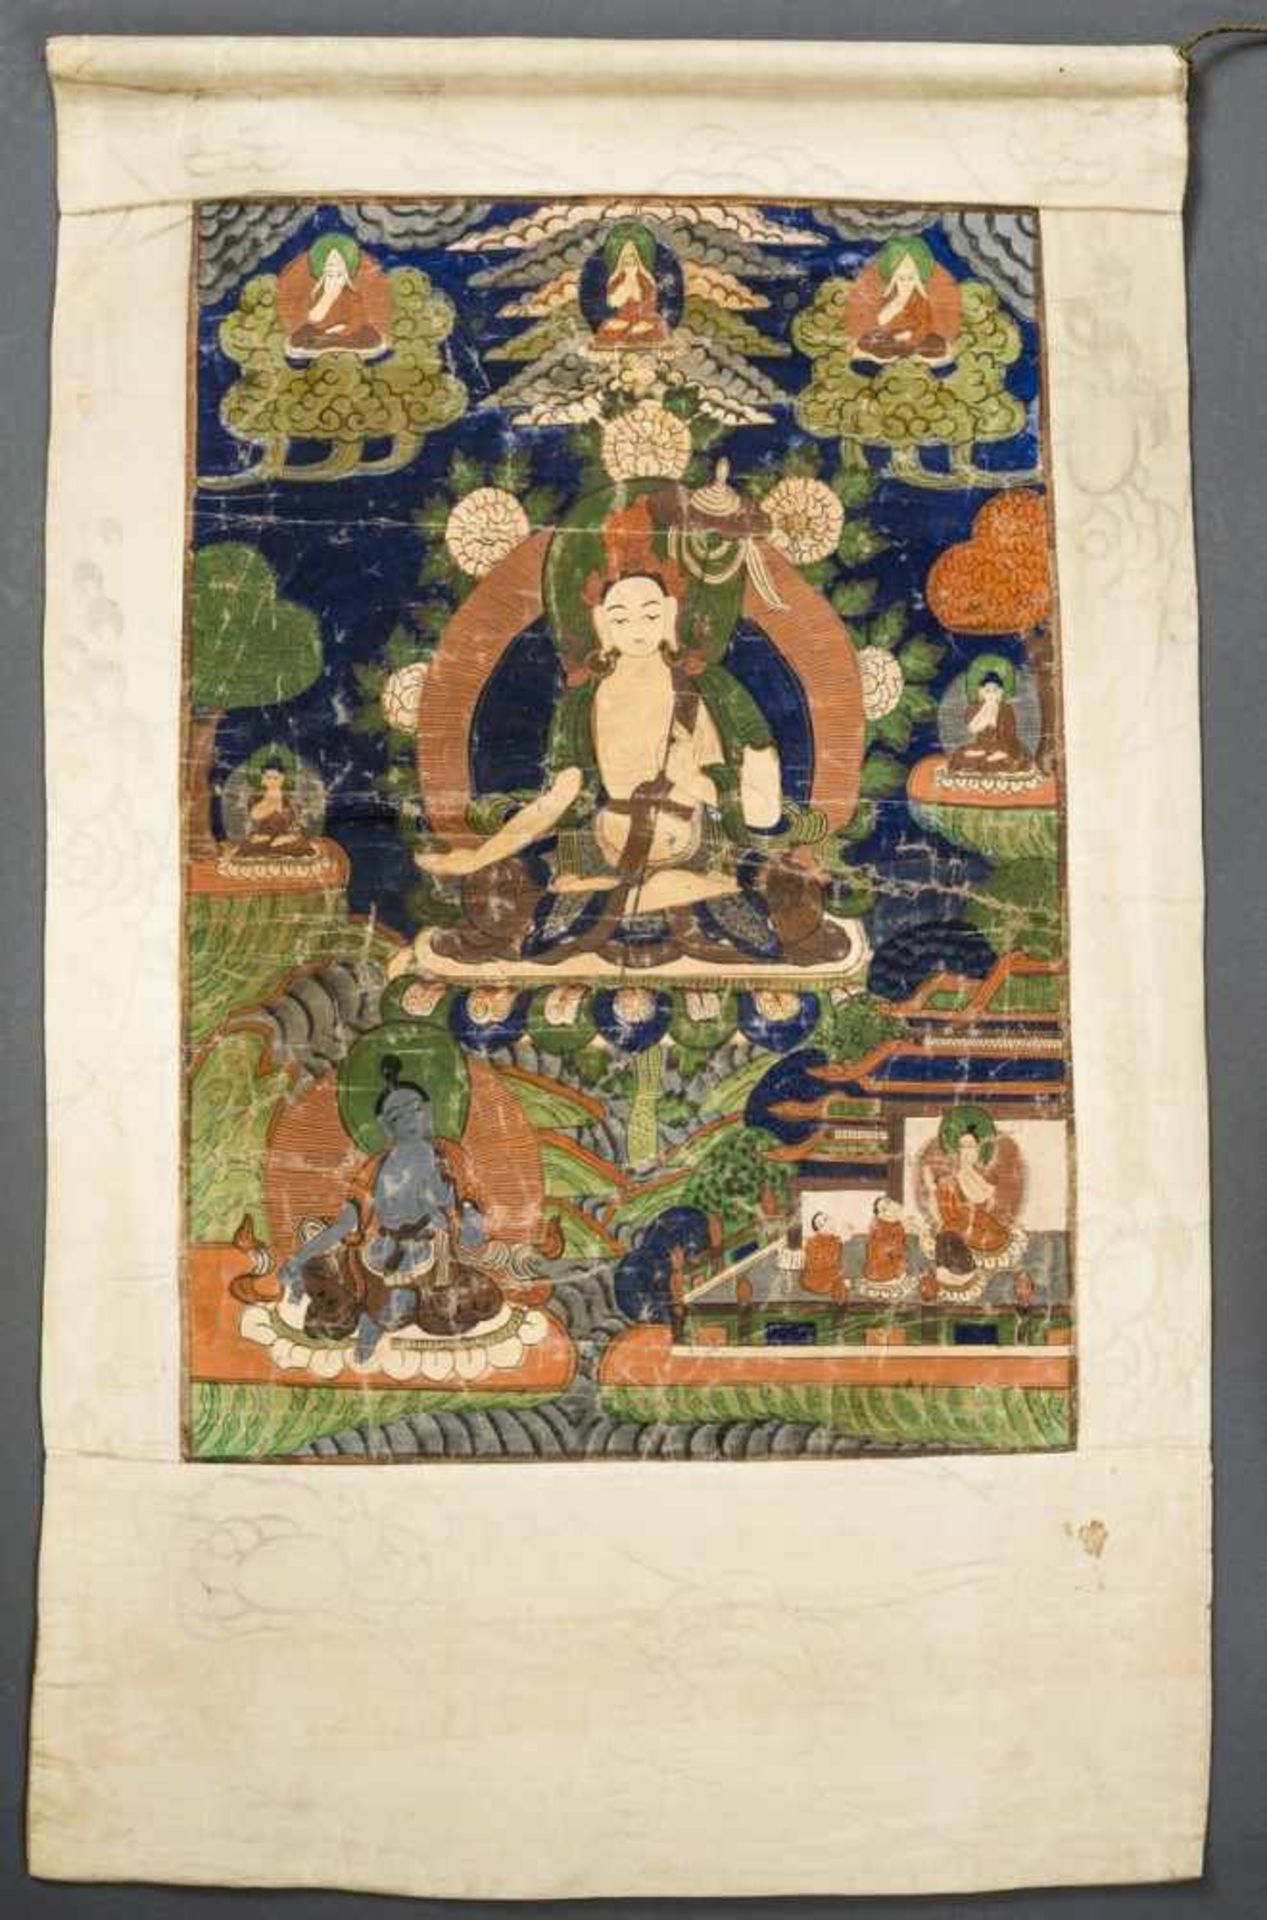 THE BODHISATTVA SITATAPATRA Thangka painting on textile. Tibet, approx. 1st half 20th cent. - Image 3 of 3